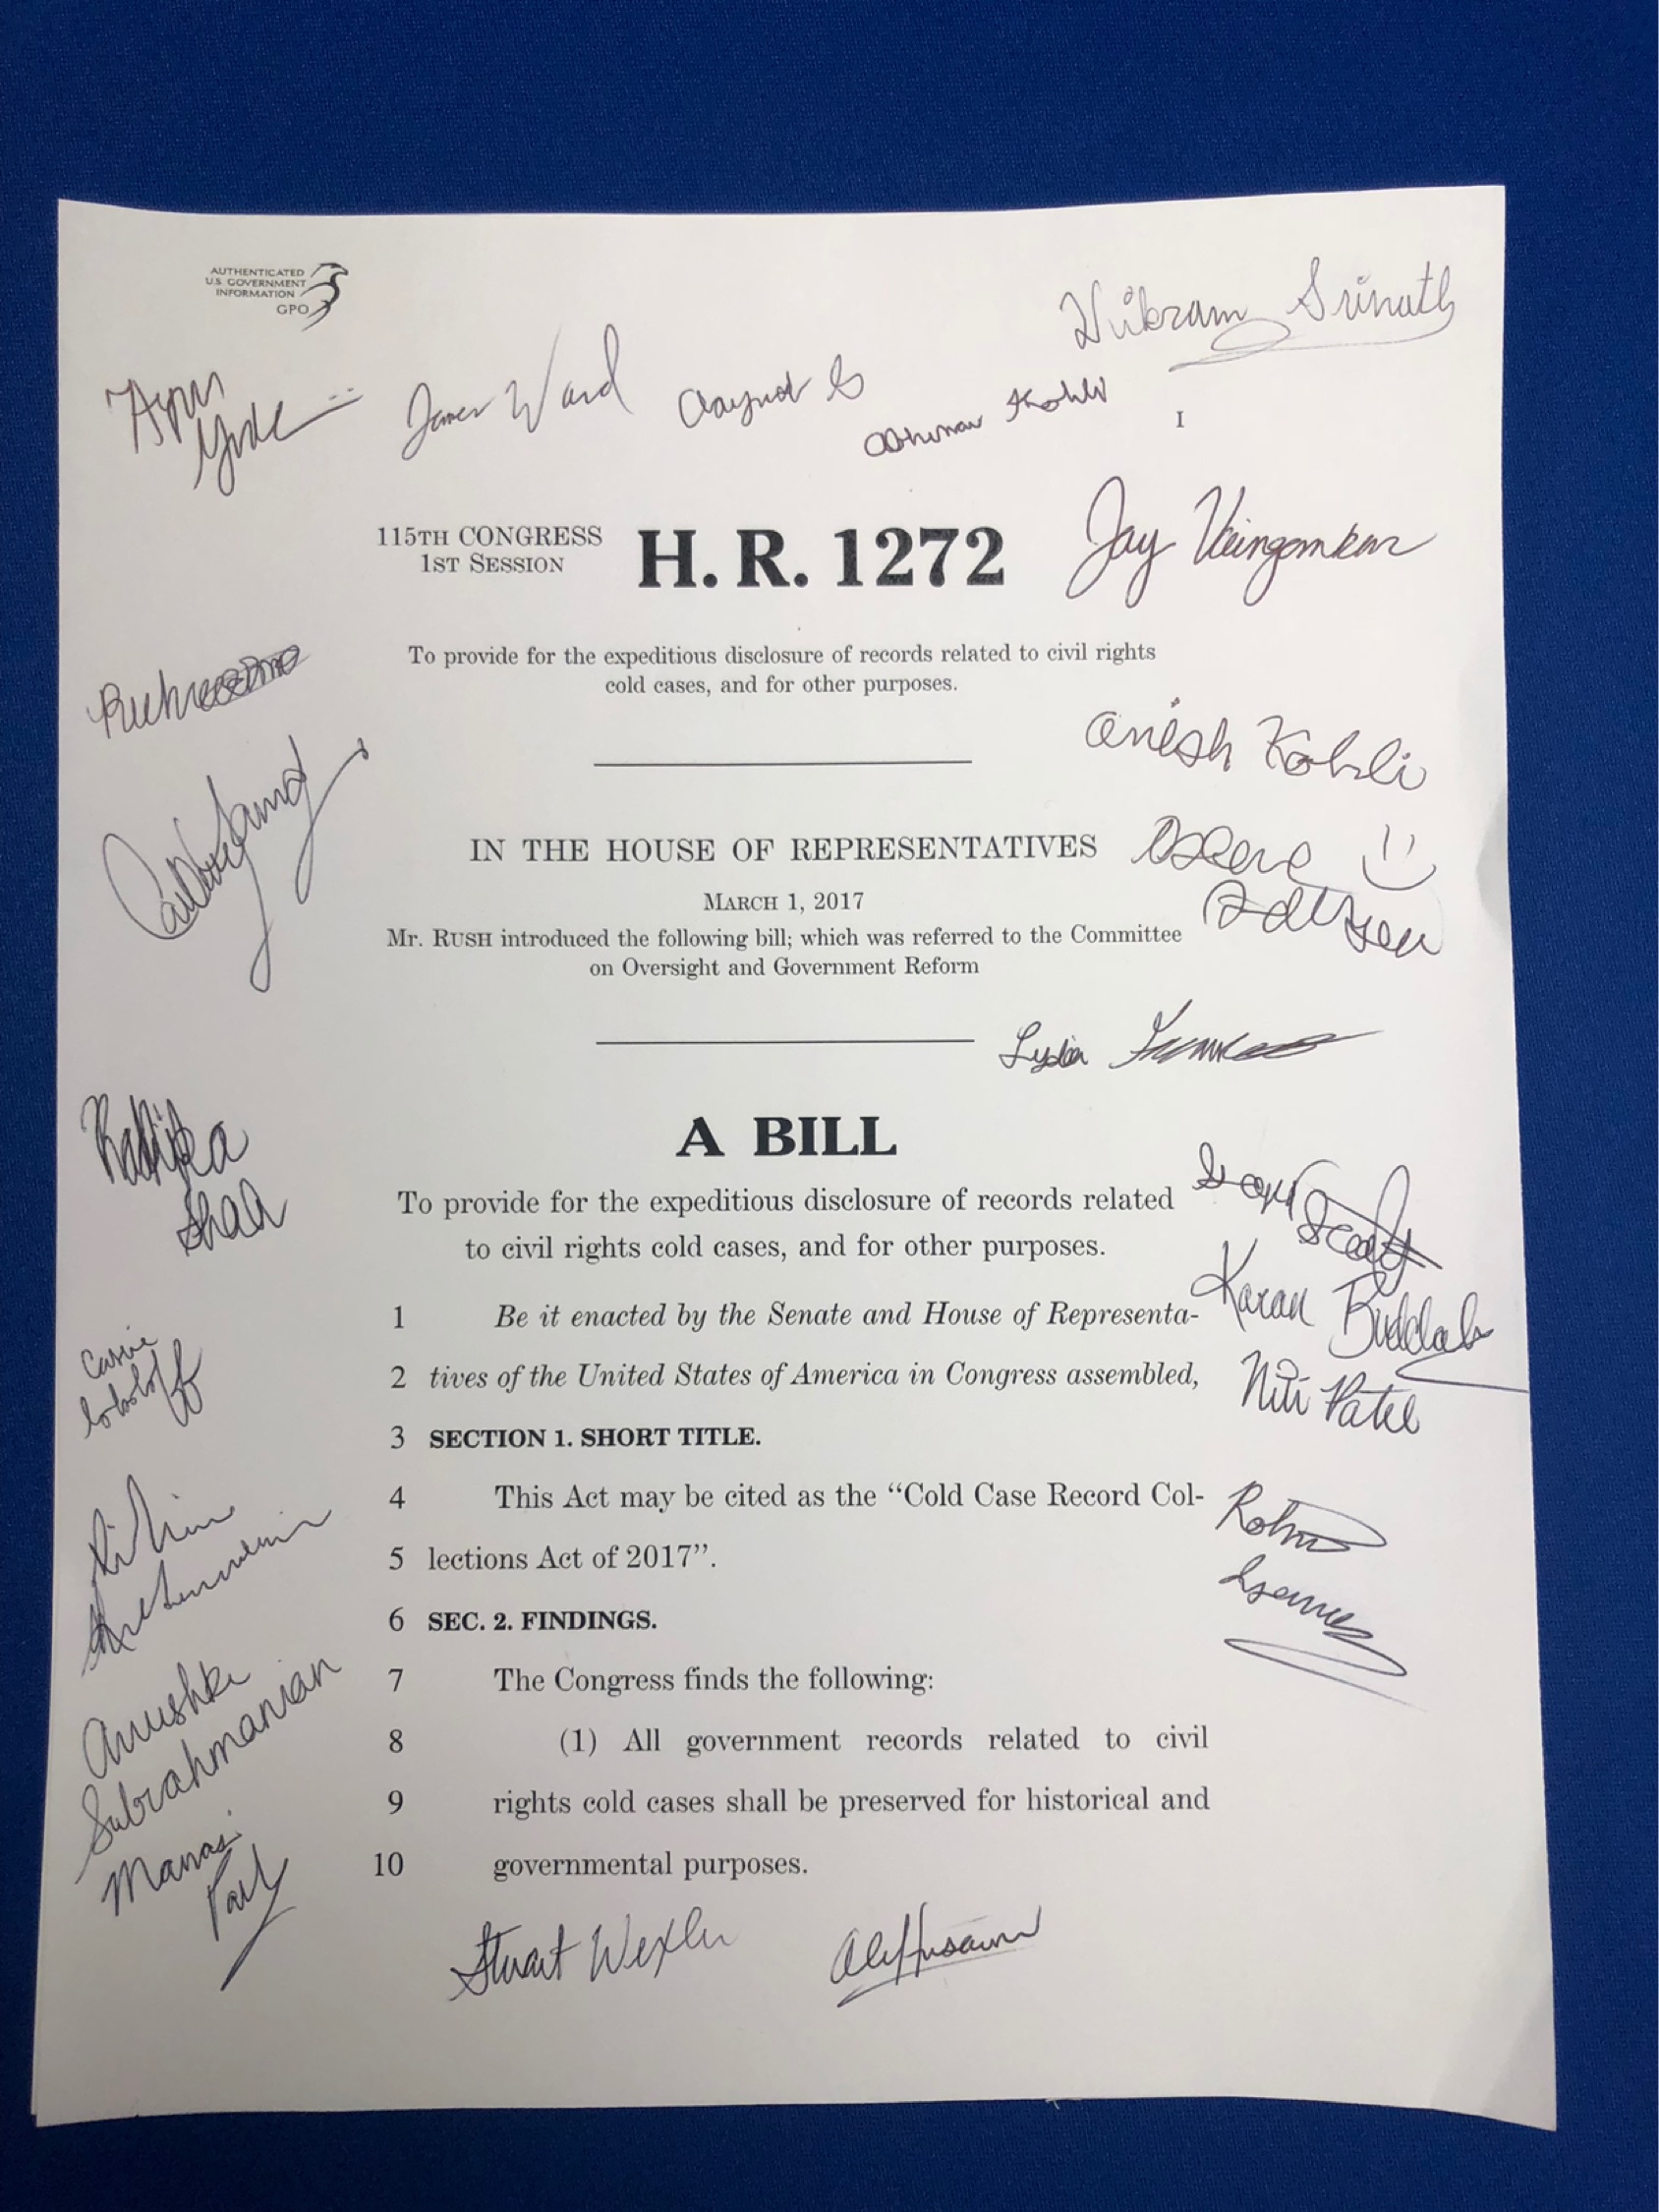 A copy of the House of Representatives version of the Cold Case Act signed by students who have worked on the bill.